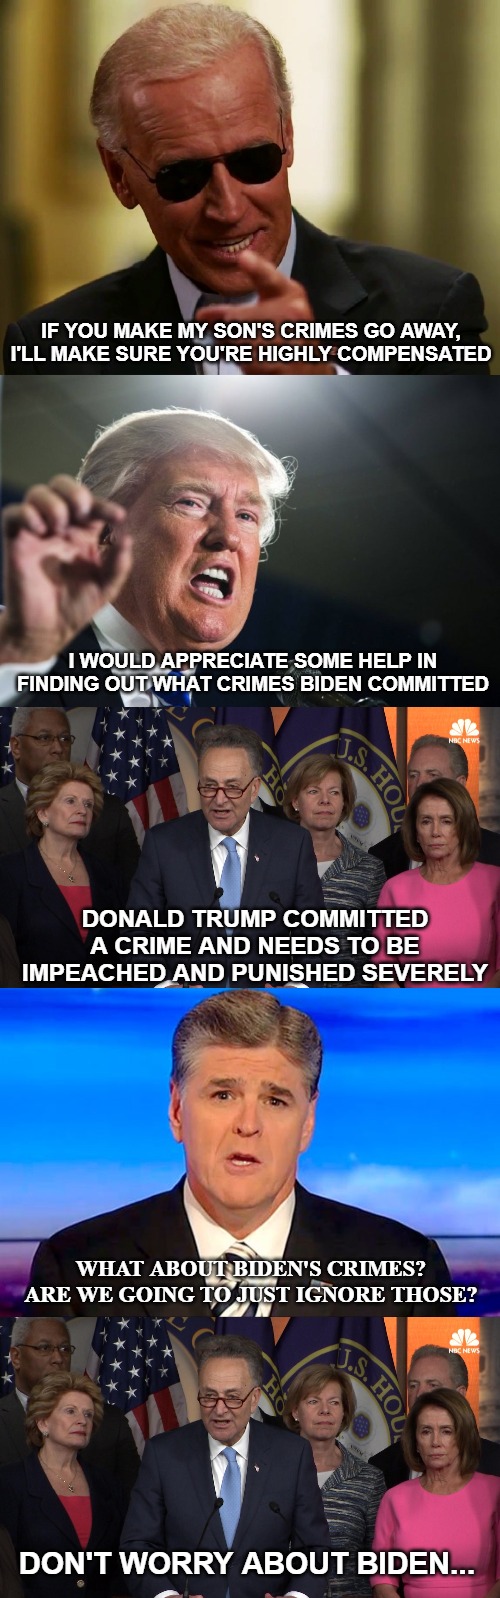 The level at which the Democrat party will stoop to try and remove a duly elected President, is sickening. And protect their own | IF YOU MAKE MY SON'S CRIMES GO AWAY, I'LL MAKE SURE YOU'RE HIGHLY COMPENSATED; I WOULD APPRECIATE SOME HELP IN FINDING OUT WHAT CRIMES BIDEN COMMITTED; DONALD TRUMP COMMITTED A CRIME AND NEEDS TO BE IMPEACHED AND PUNISHED SEVERELY; WHAT ABOUT BIDEN'S CRIMES? ARE WE GOING TO JUST IGNORE THOSE? DON'T WORRY ABOUT BIDEN... | image tagged in donald trump,democrat congressmen,sean hannity fox news,joe biden,witch hunt,evil democrats | made w/ Imgflip meme maker